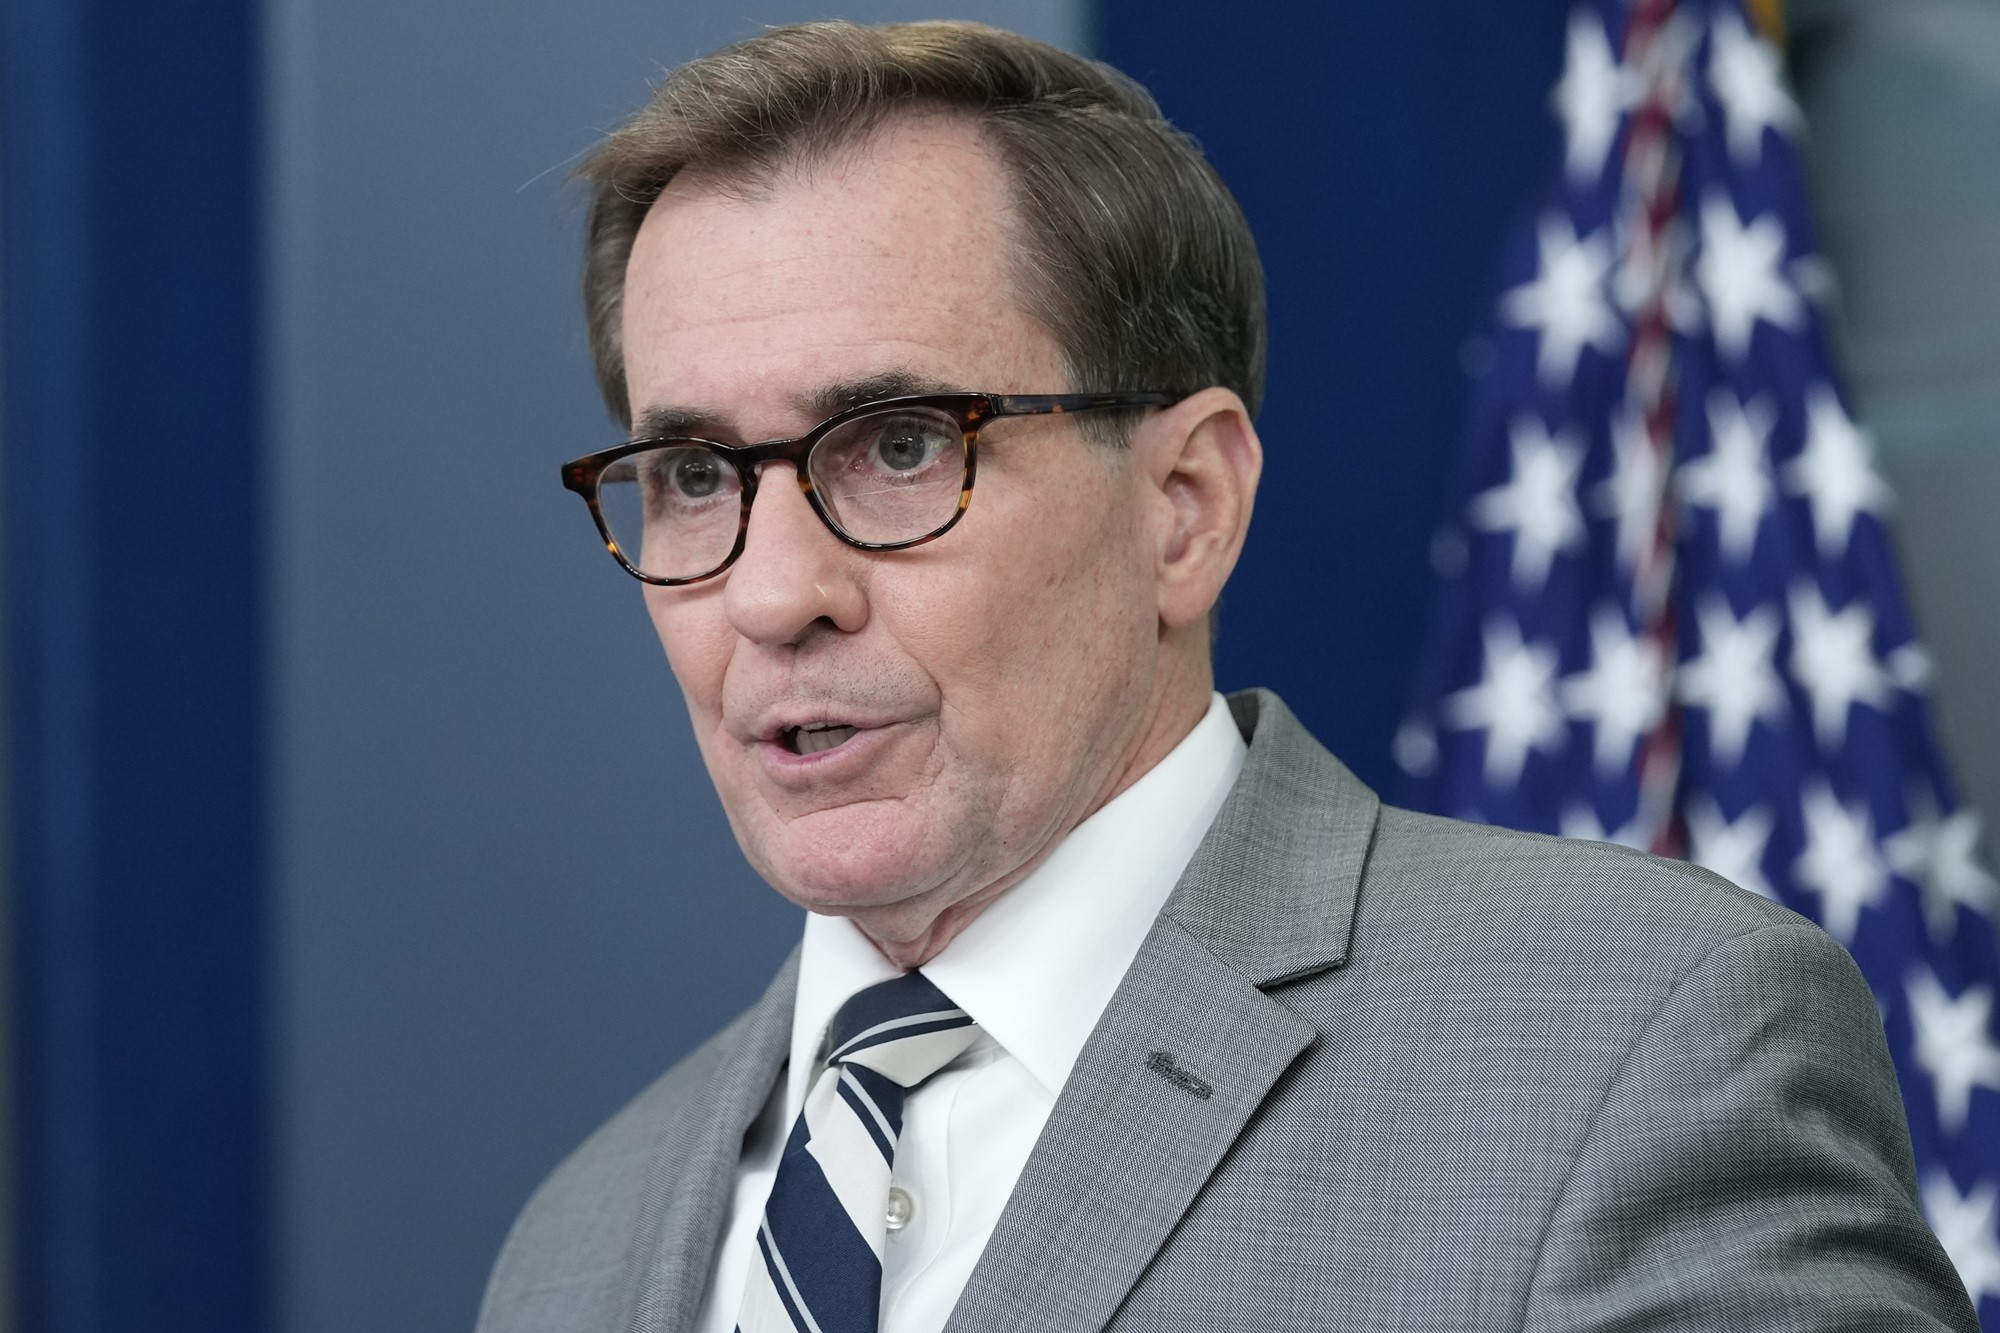 A middle aged white man in a suit and glasses speaks in front of an American flag